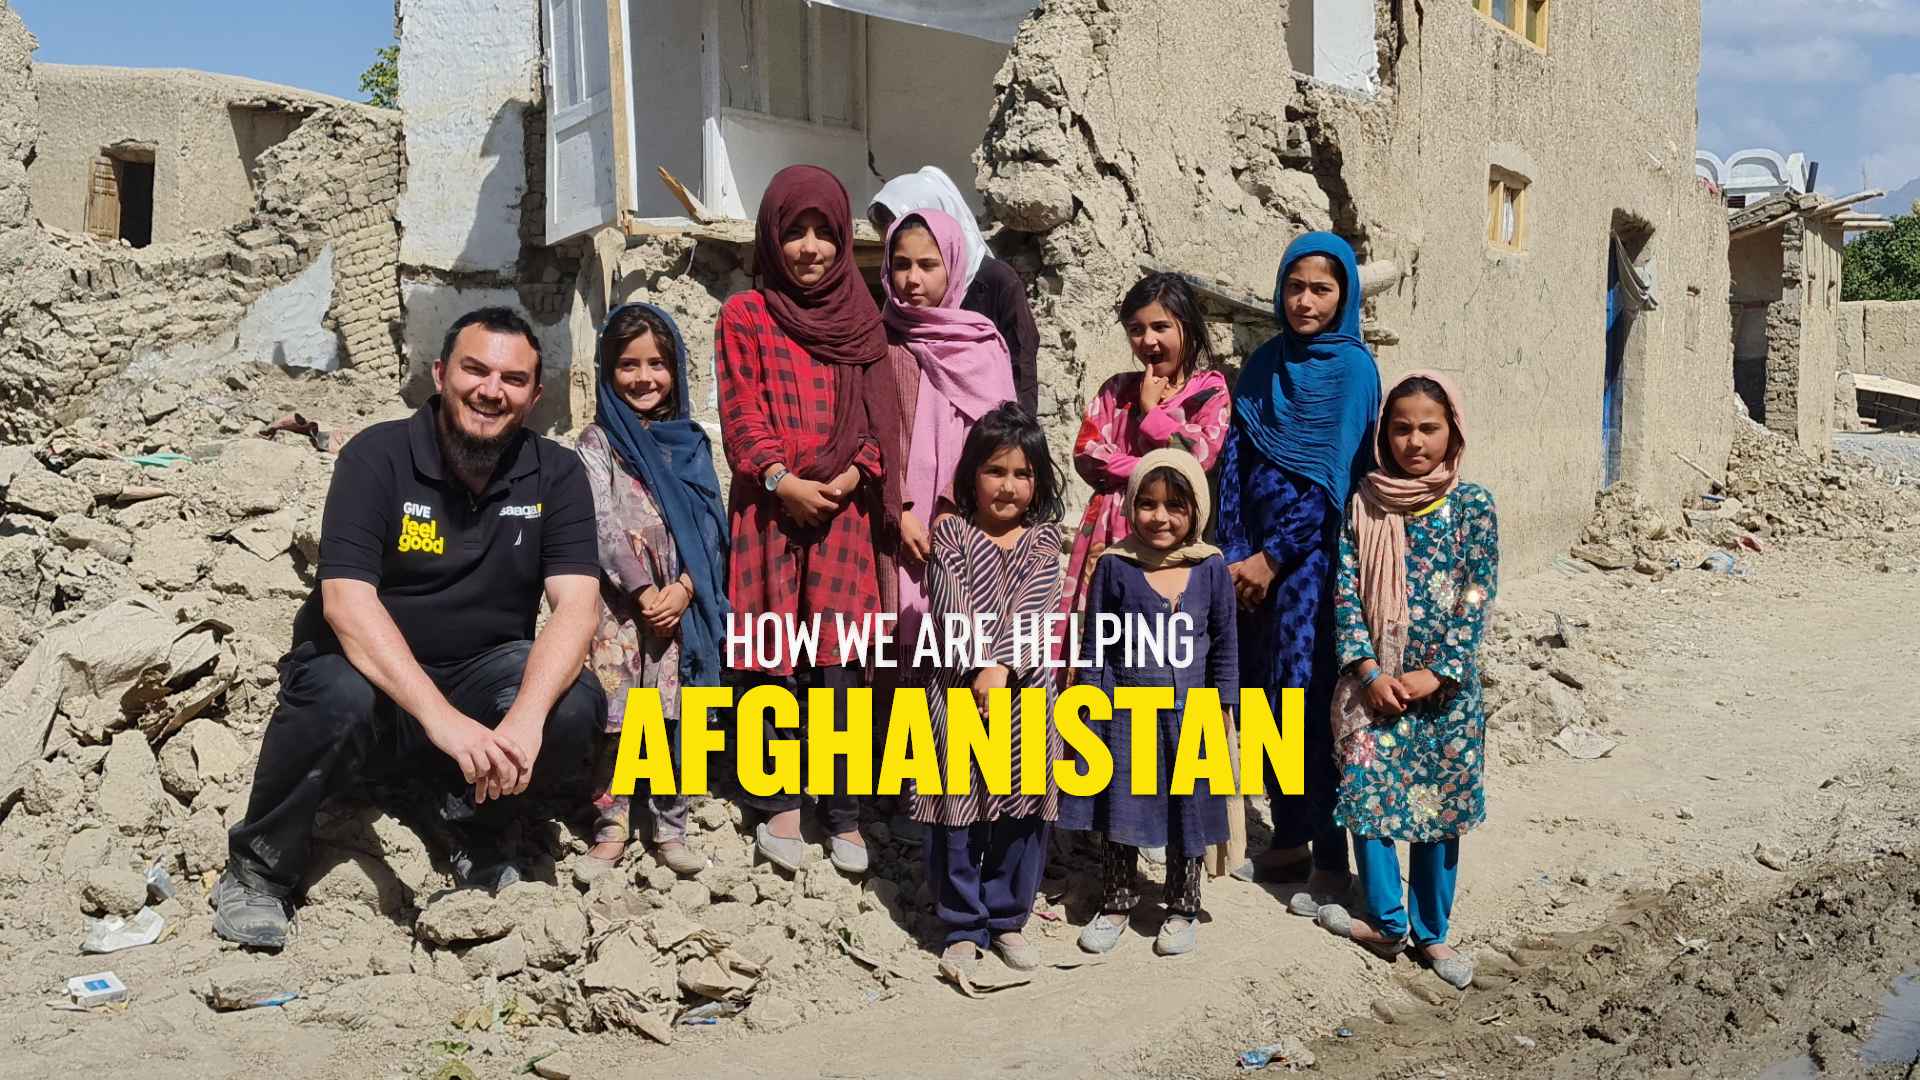 Afghanistan Relief